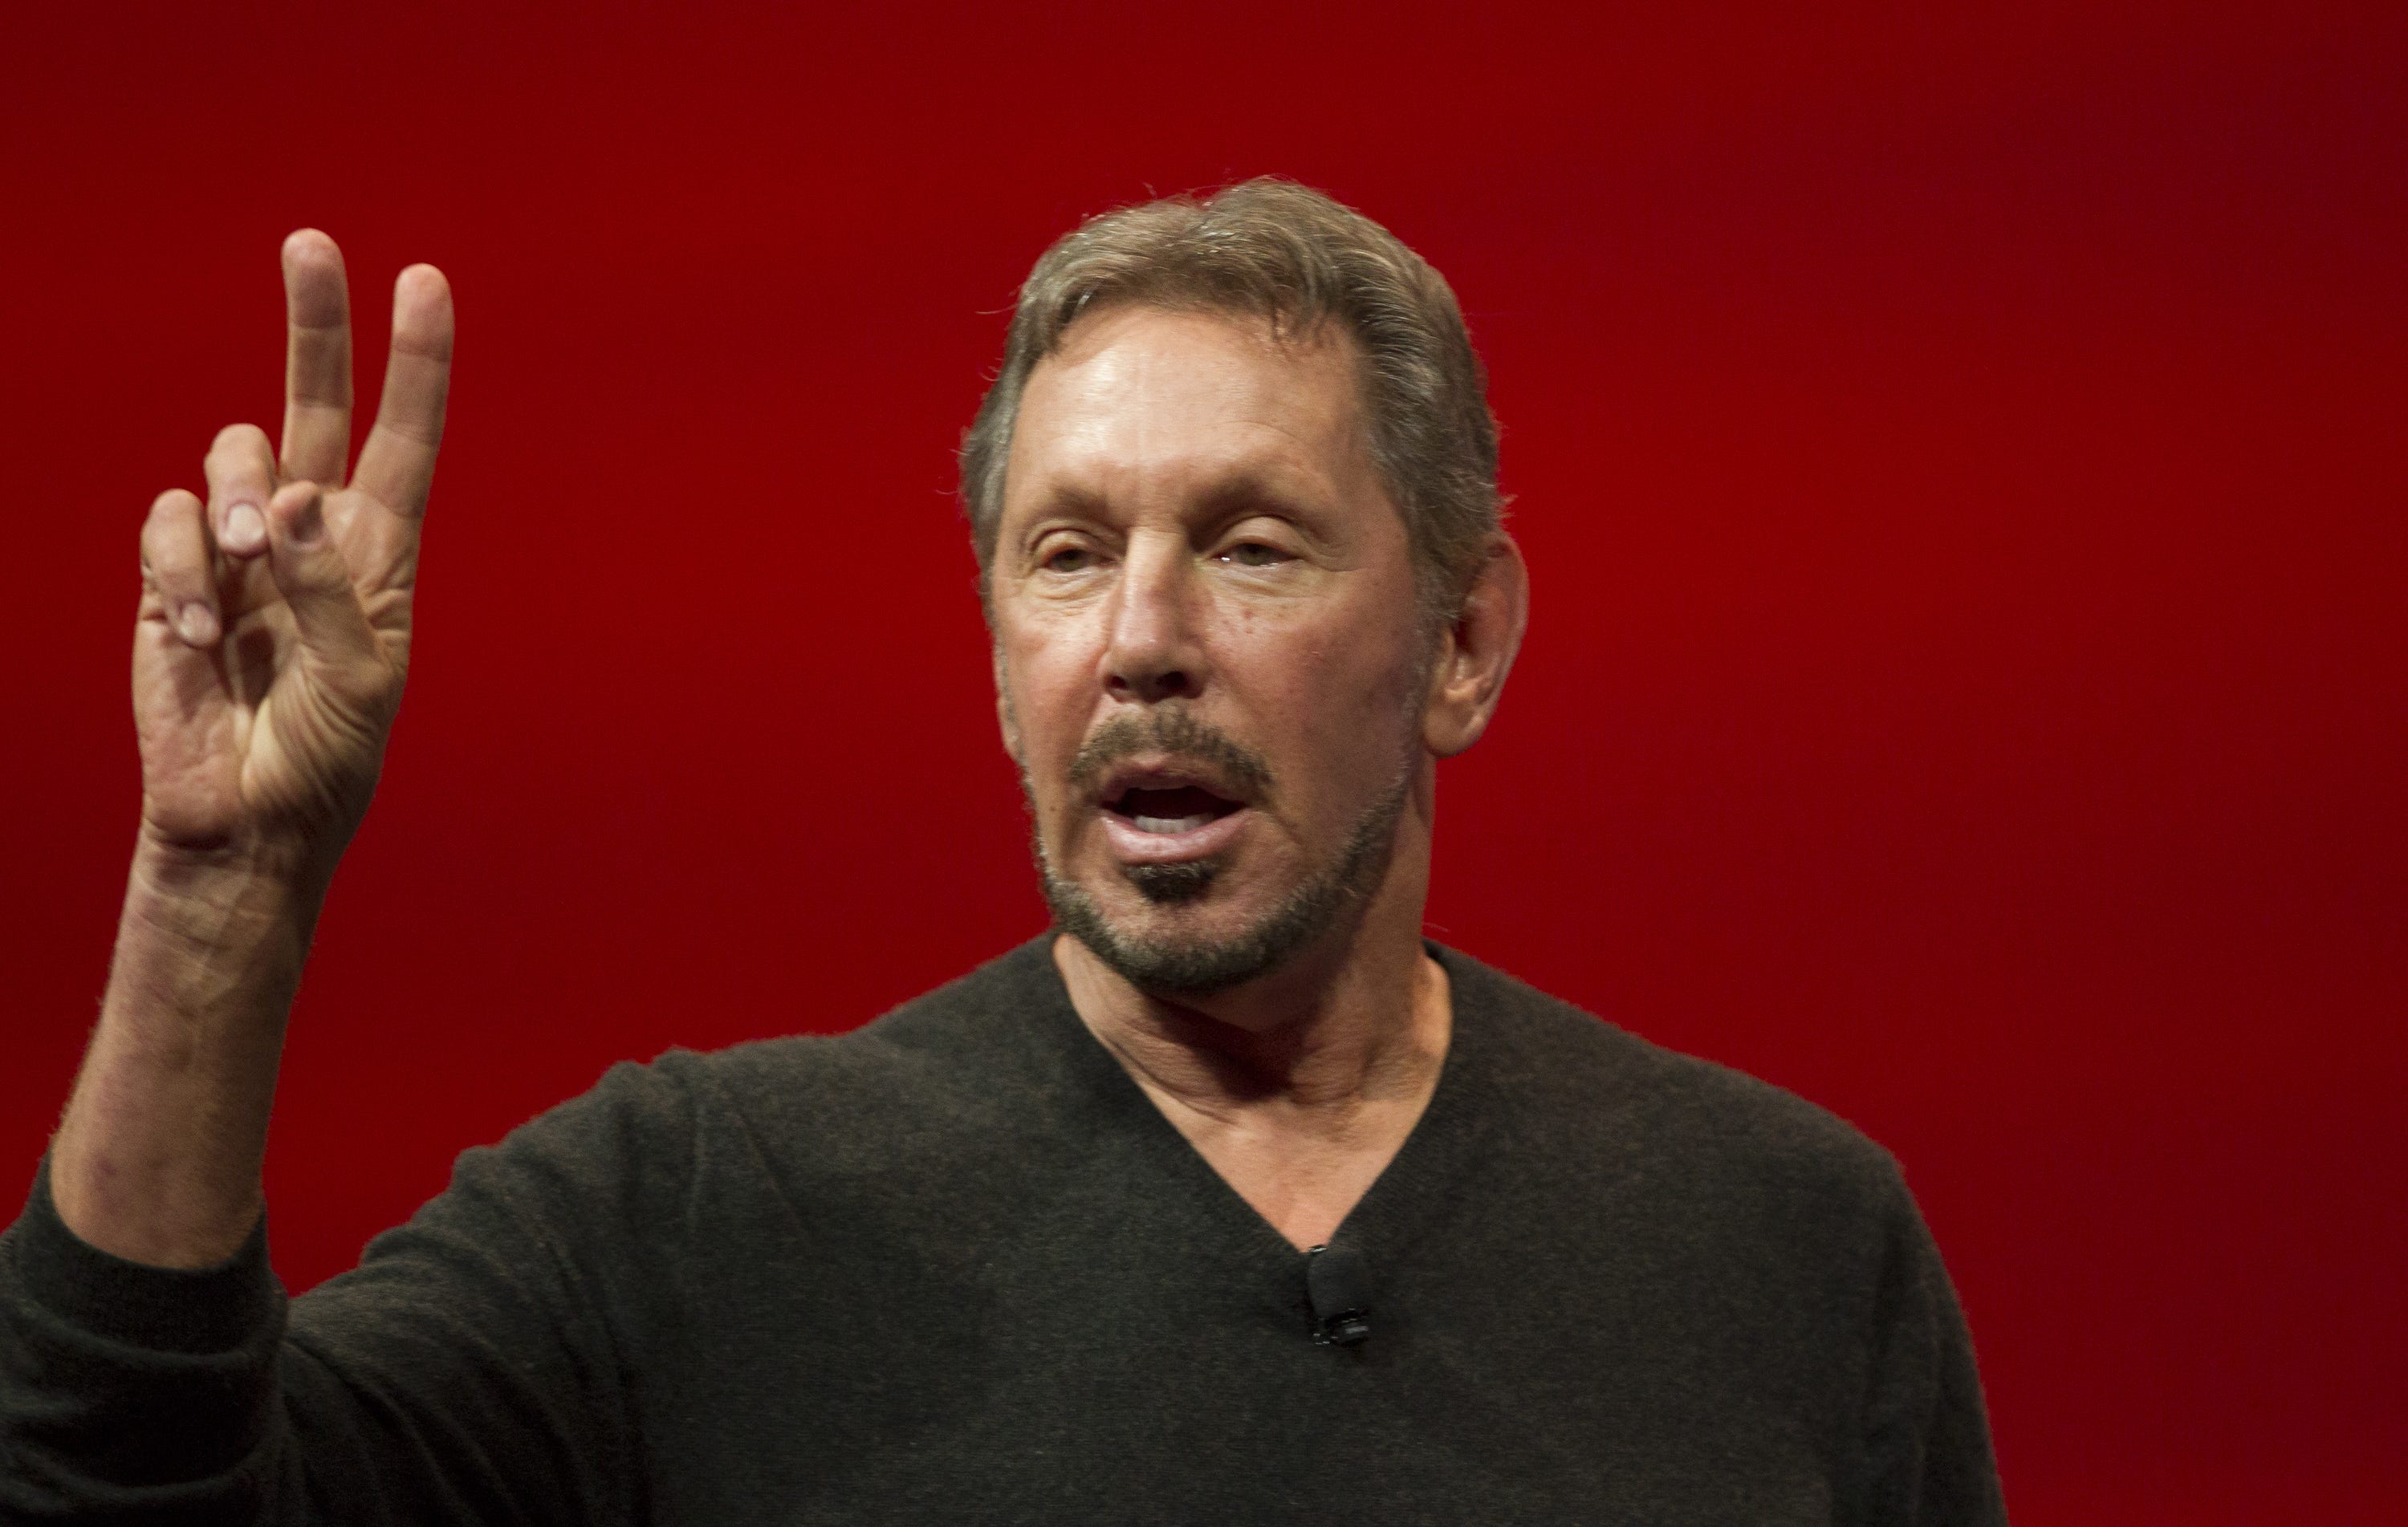 <p>Ellison handed control over to Hurd and Catz, who became co-CEOs. Ellison now serves as the company's chairman and chief technology officer. Following Hurd's death in 2019, <a href="https://www.businessinsider.com/oracle-safra-catz-mark-hurd-ceo-2019-11">Catz became the sole CEO.</a></p>